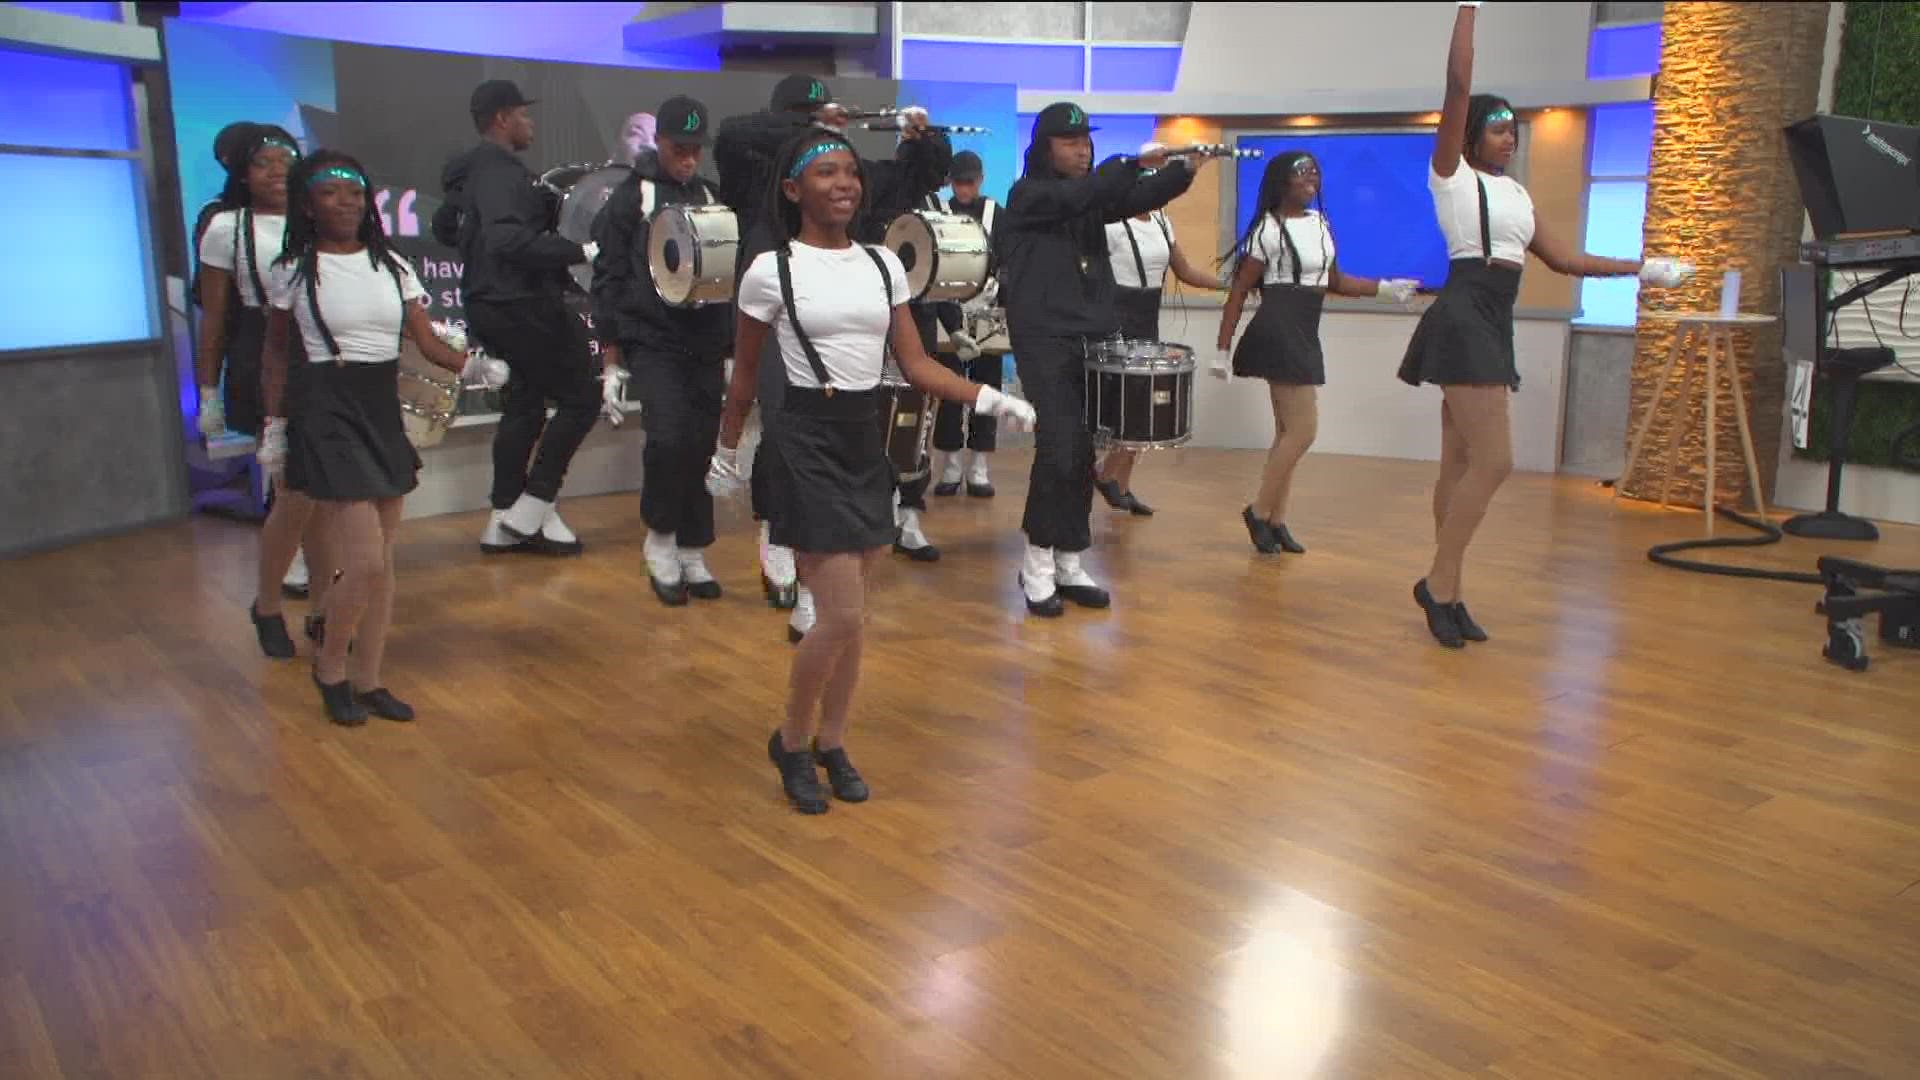 Former member of the Grambling State University Marching Band brought drumline to South San Diego YMCA